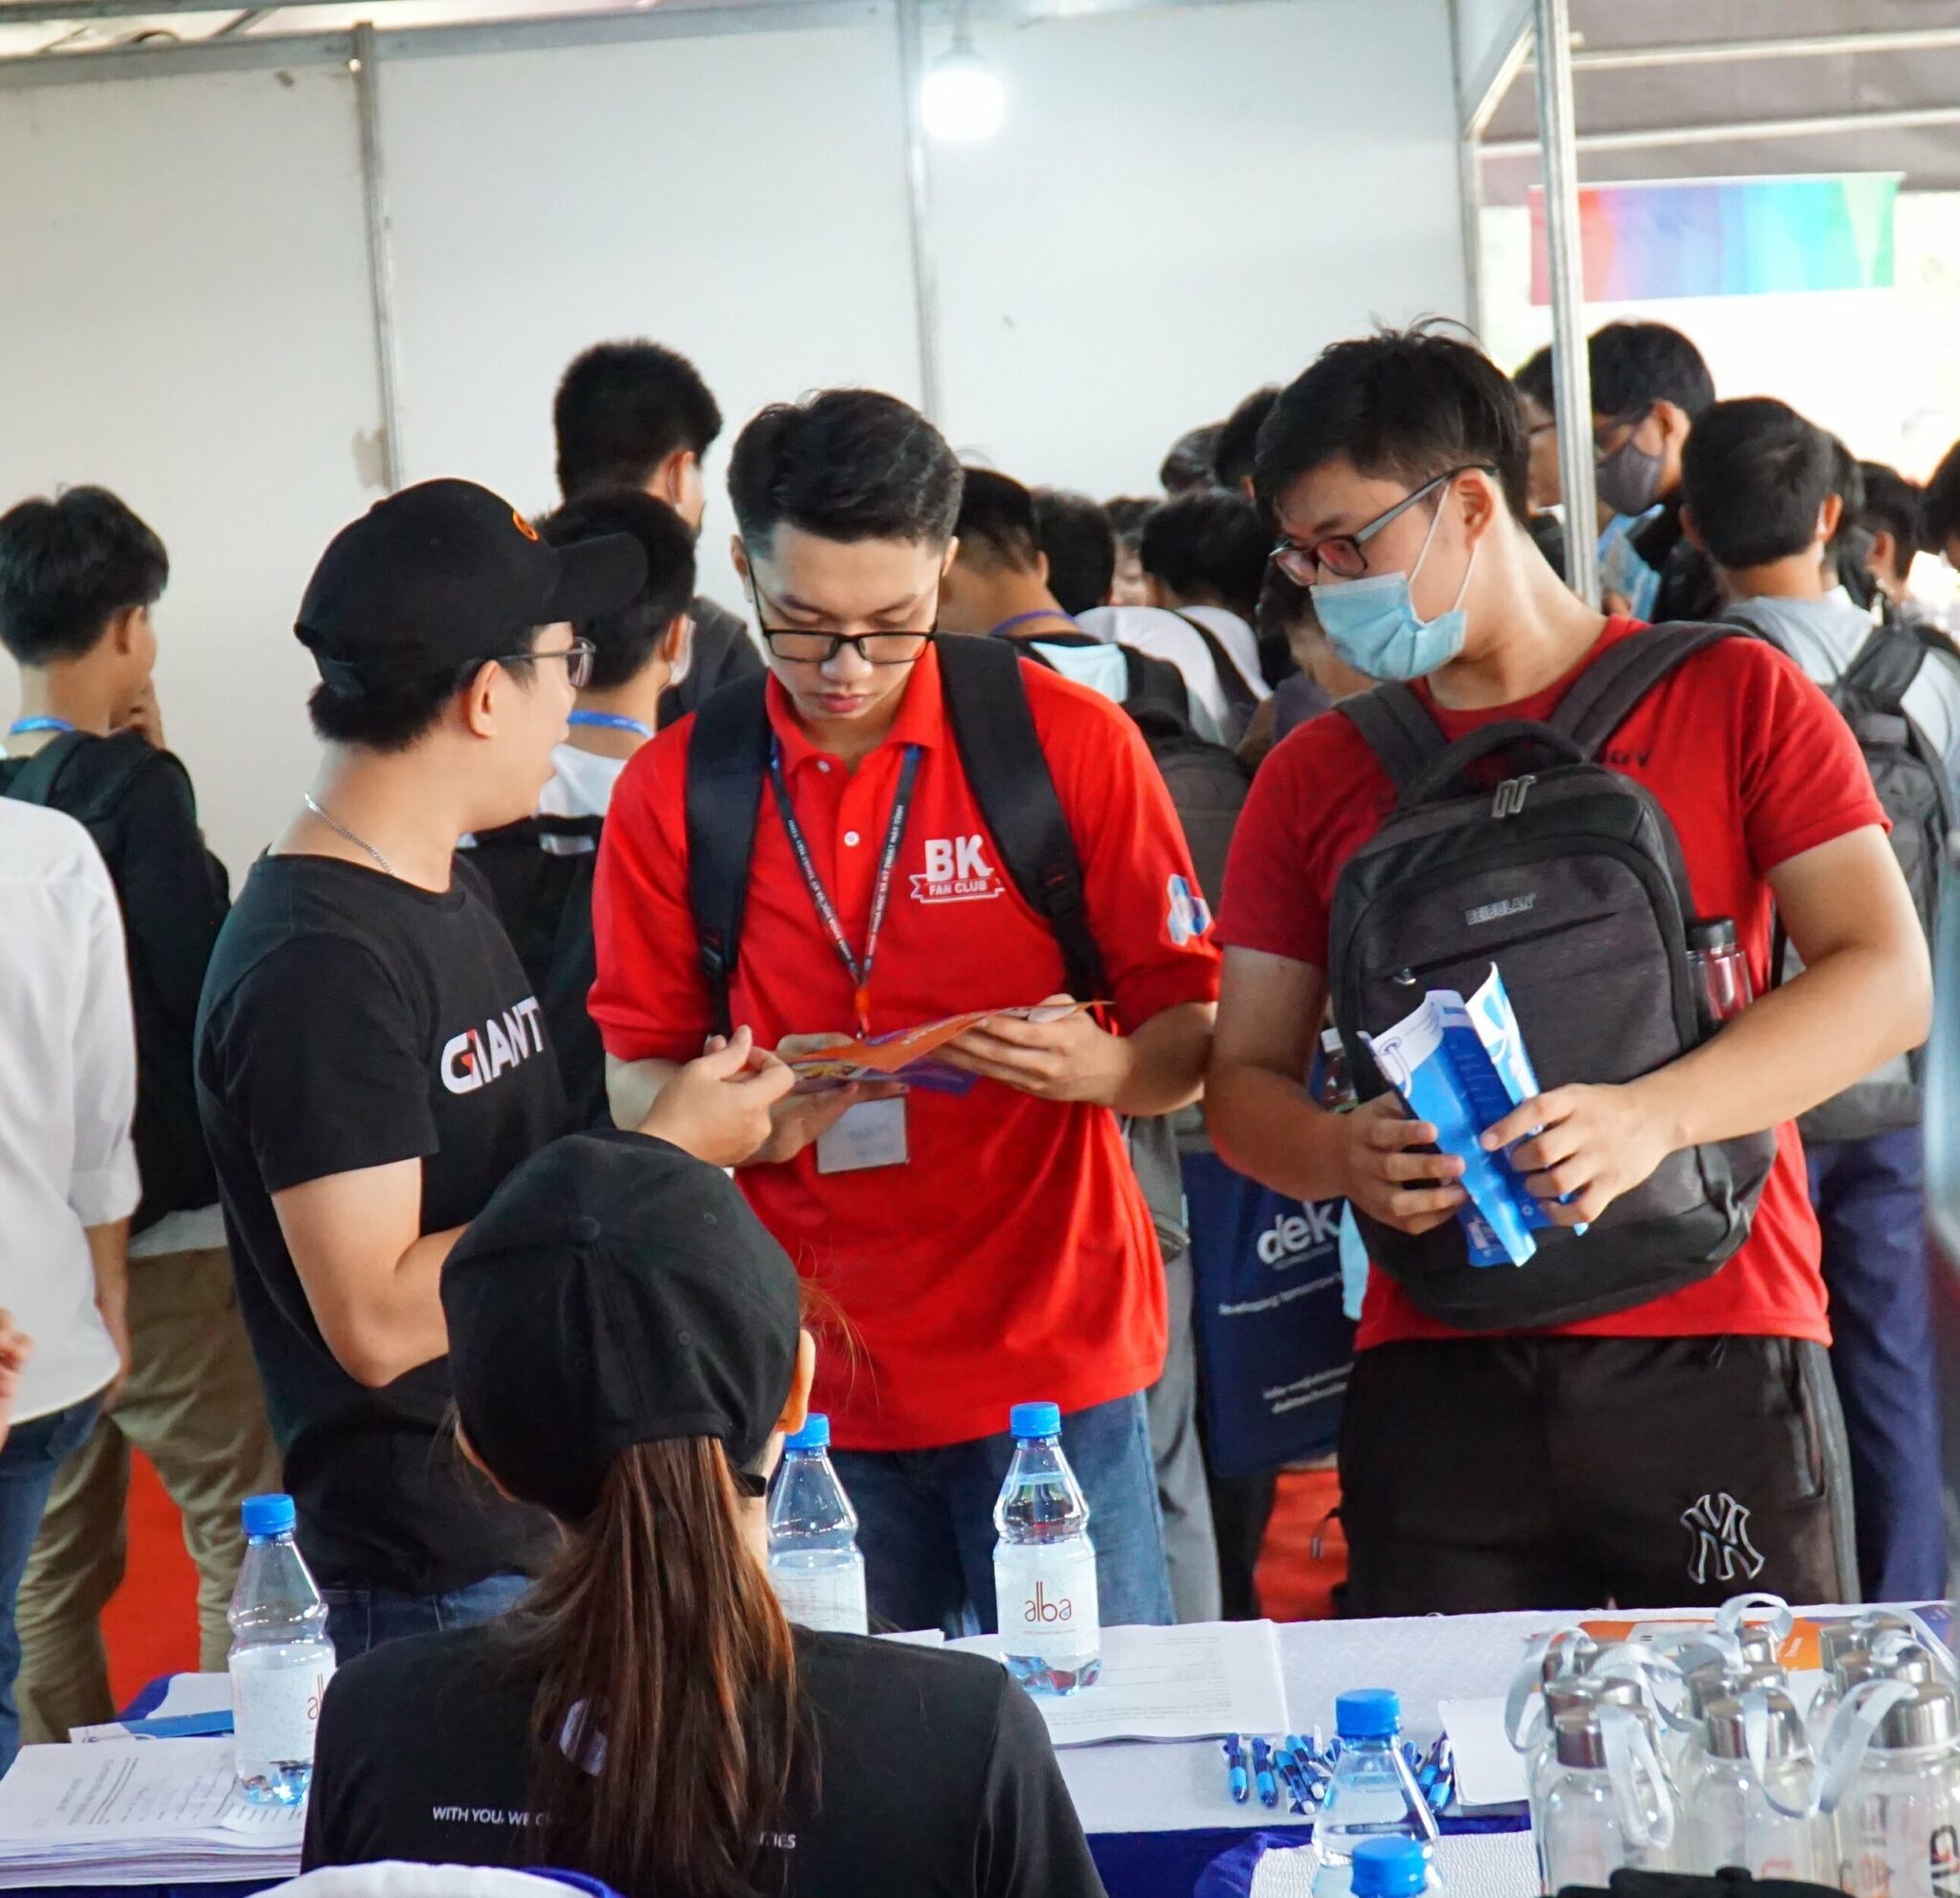 Mr. Minh Thanh is advising Polytechnic students about job opportunities at GIANTY